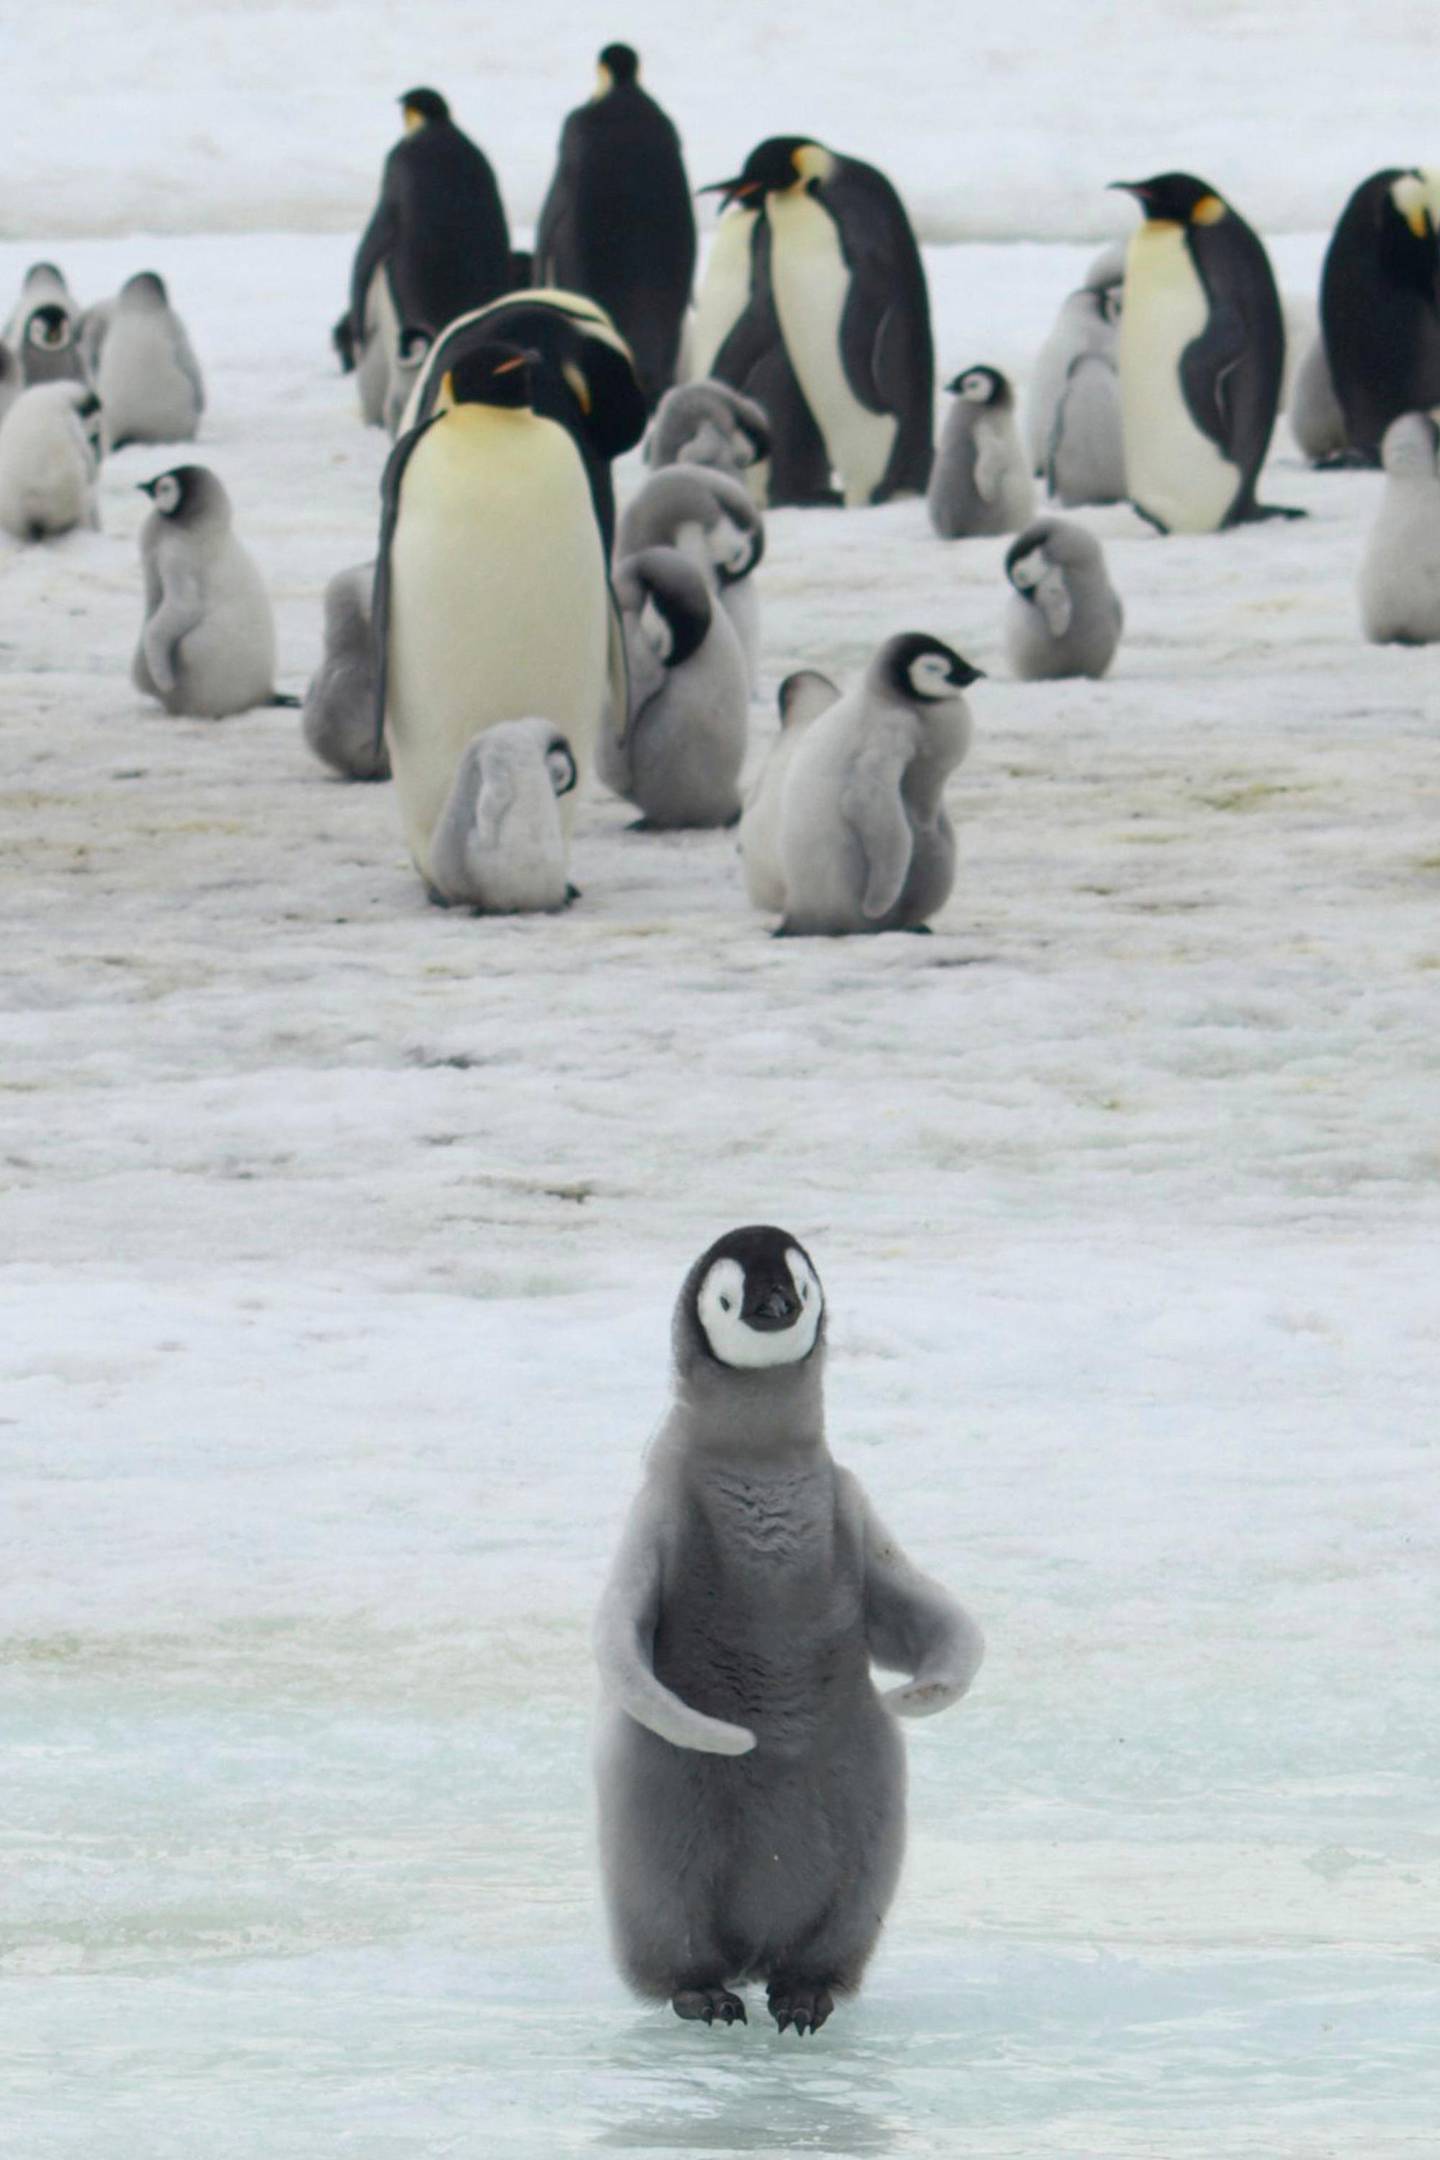 This 2010 photo provided by the British Antarctic Survey shows emperor penguins and chicks at Antarctica's Halley Bay. A study released on Wednesday, April 24, 2019 finds that since 2016 there are almost no births at Halley Bay, the second biggest breeding ground for emperor penguins. Numbers are booming nearby, but it doesnÄôt make up for the losses at this site. (Peter Fretwell/British Antarctic Survey via AP)